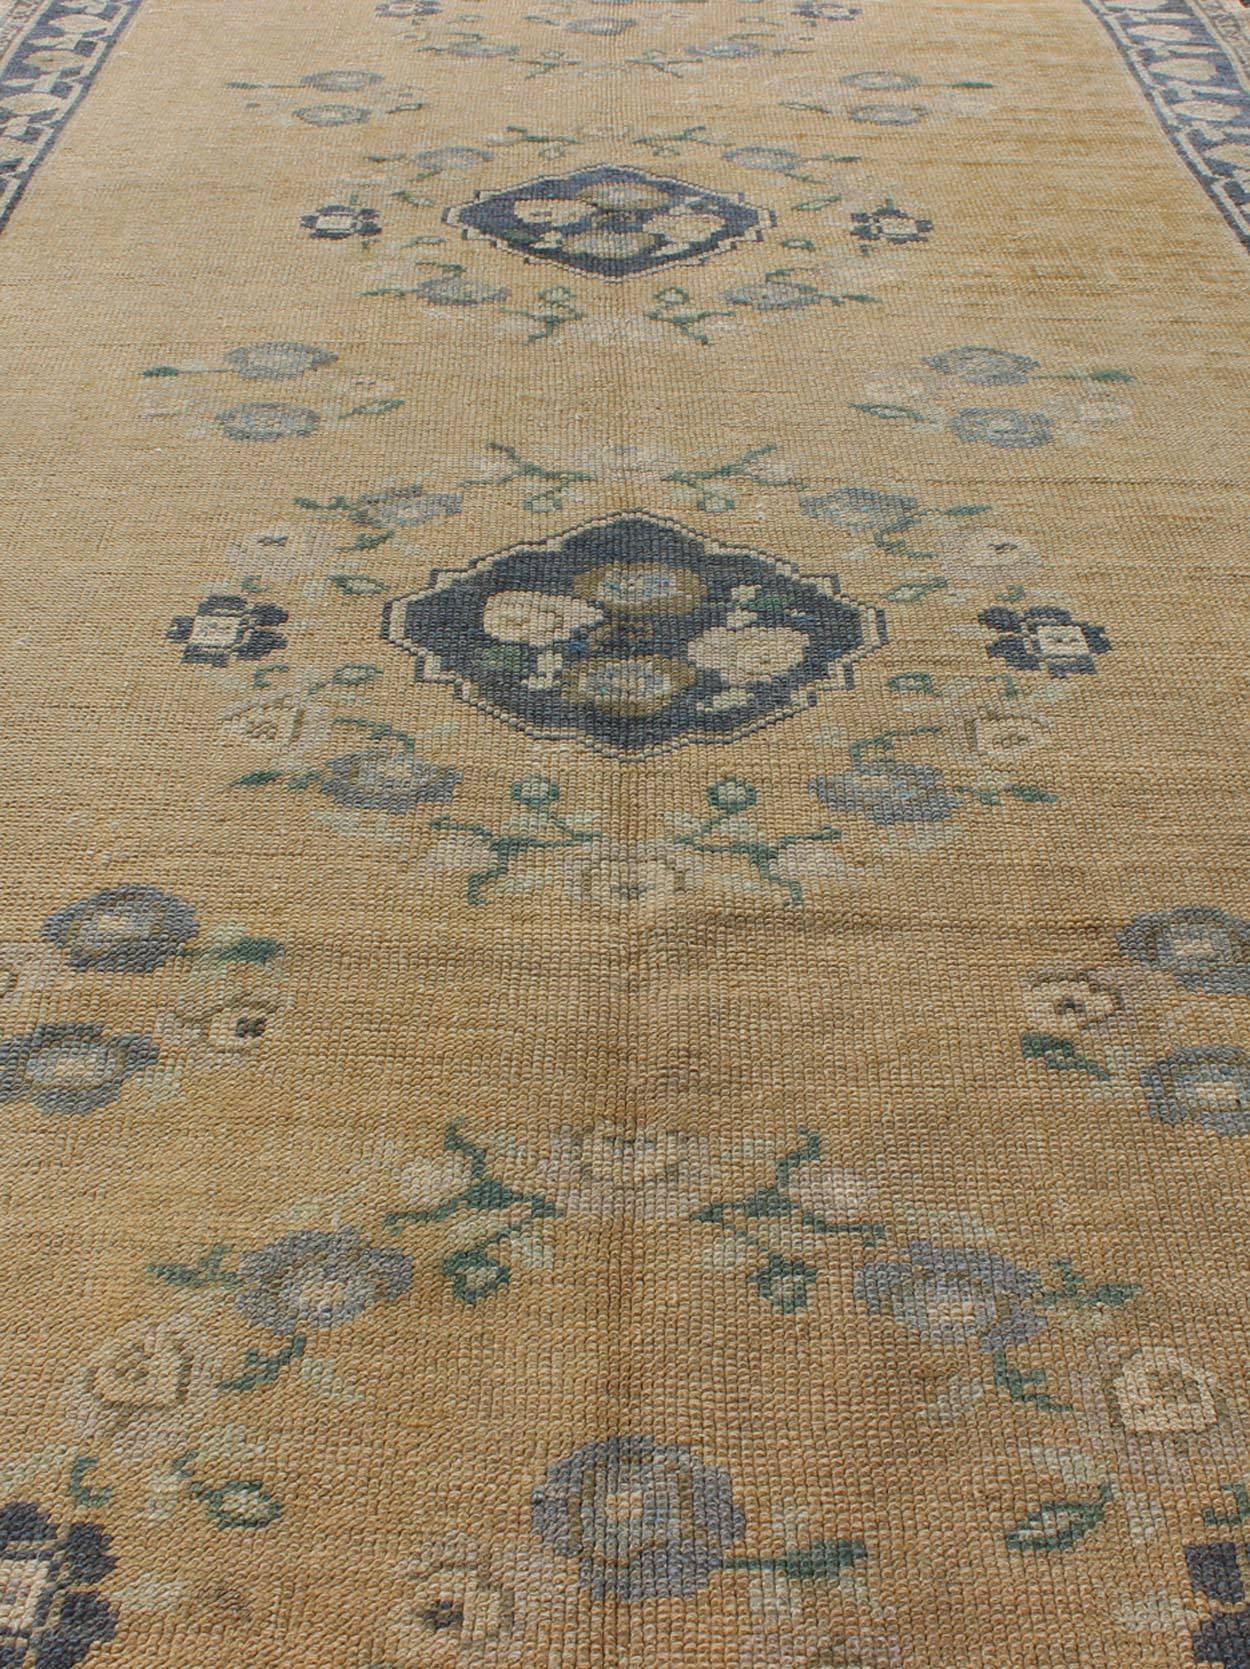 Wool Oushak Gallery Rug from Mid-20th Century Turkey with Floral Design For Sale